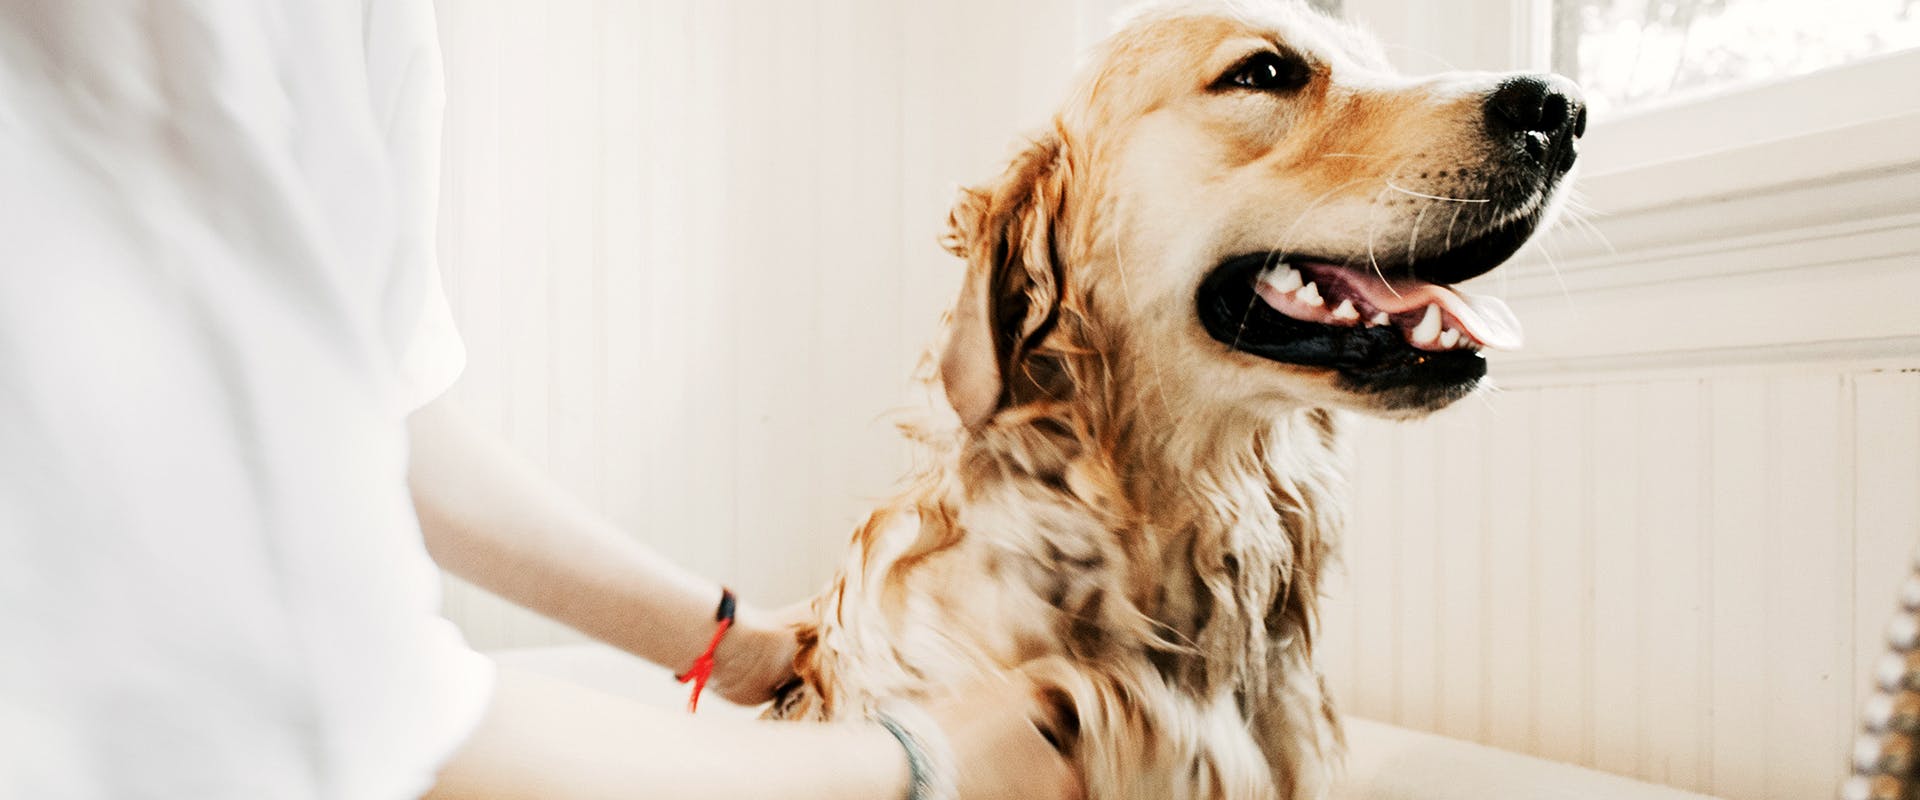 Best dog brushes for shedding - a Golden Retriever having a wash in the bathtub